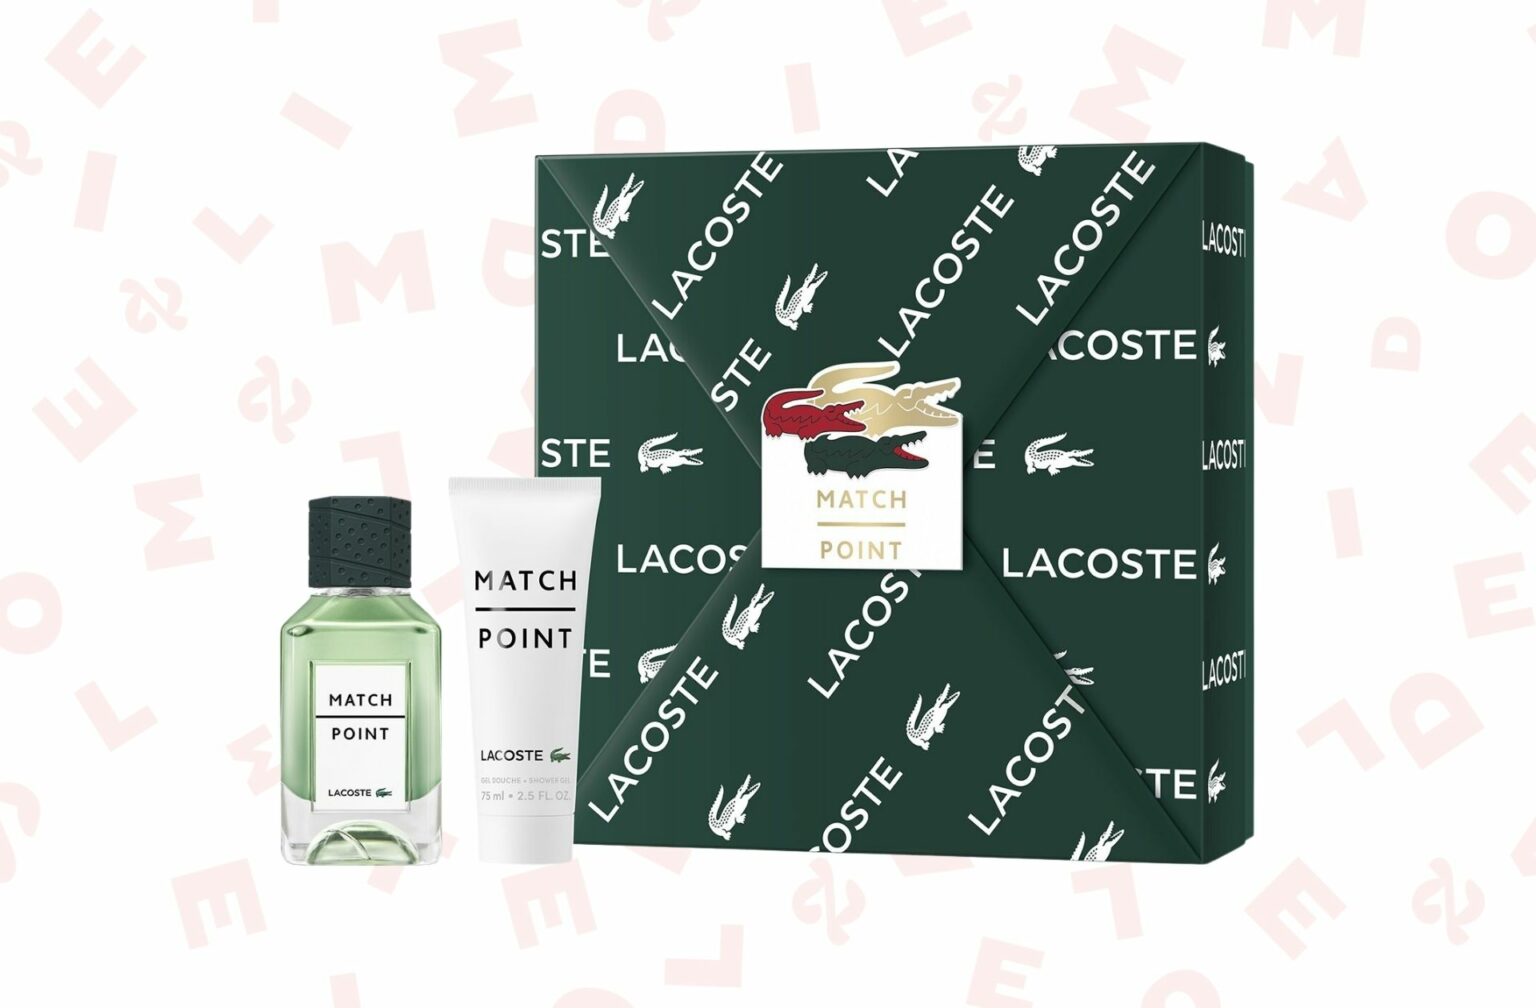 match-point-lacoste